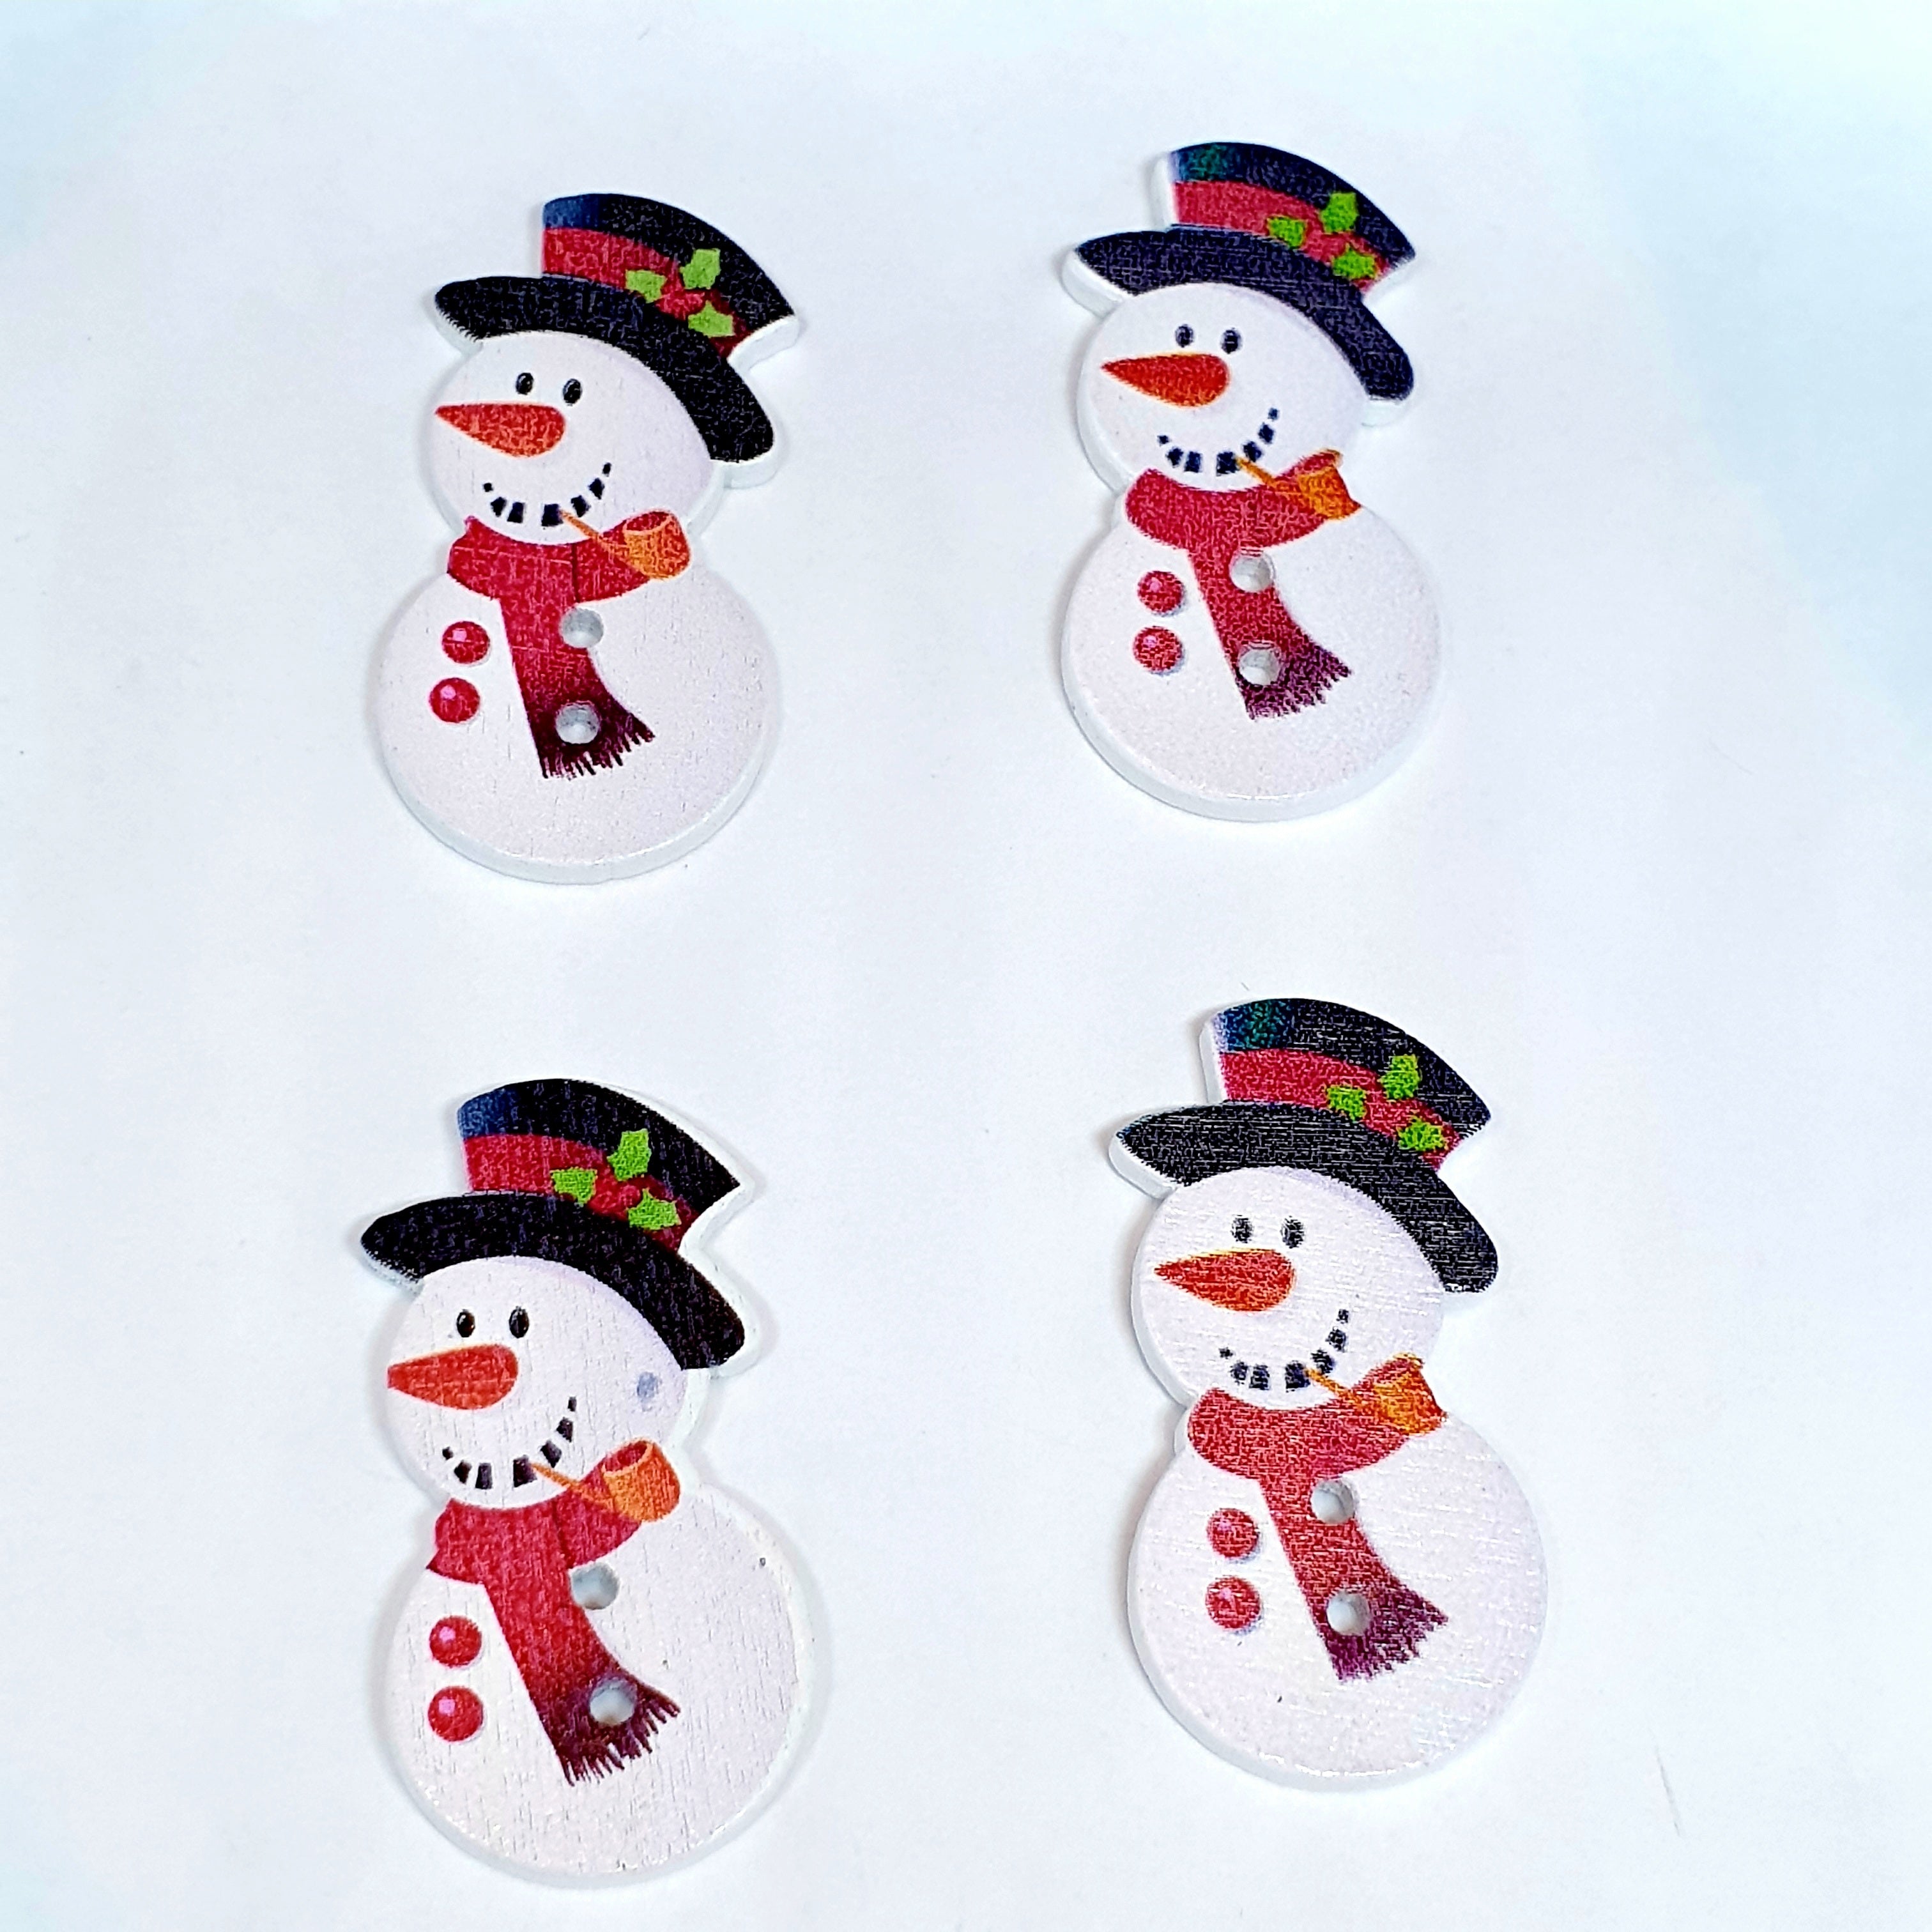 MajorCrafts 15pcs 36mm x 18mm White Christmas Snowman with Red Scarf 2 Holes Large Wood Sewing Buttons